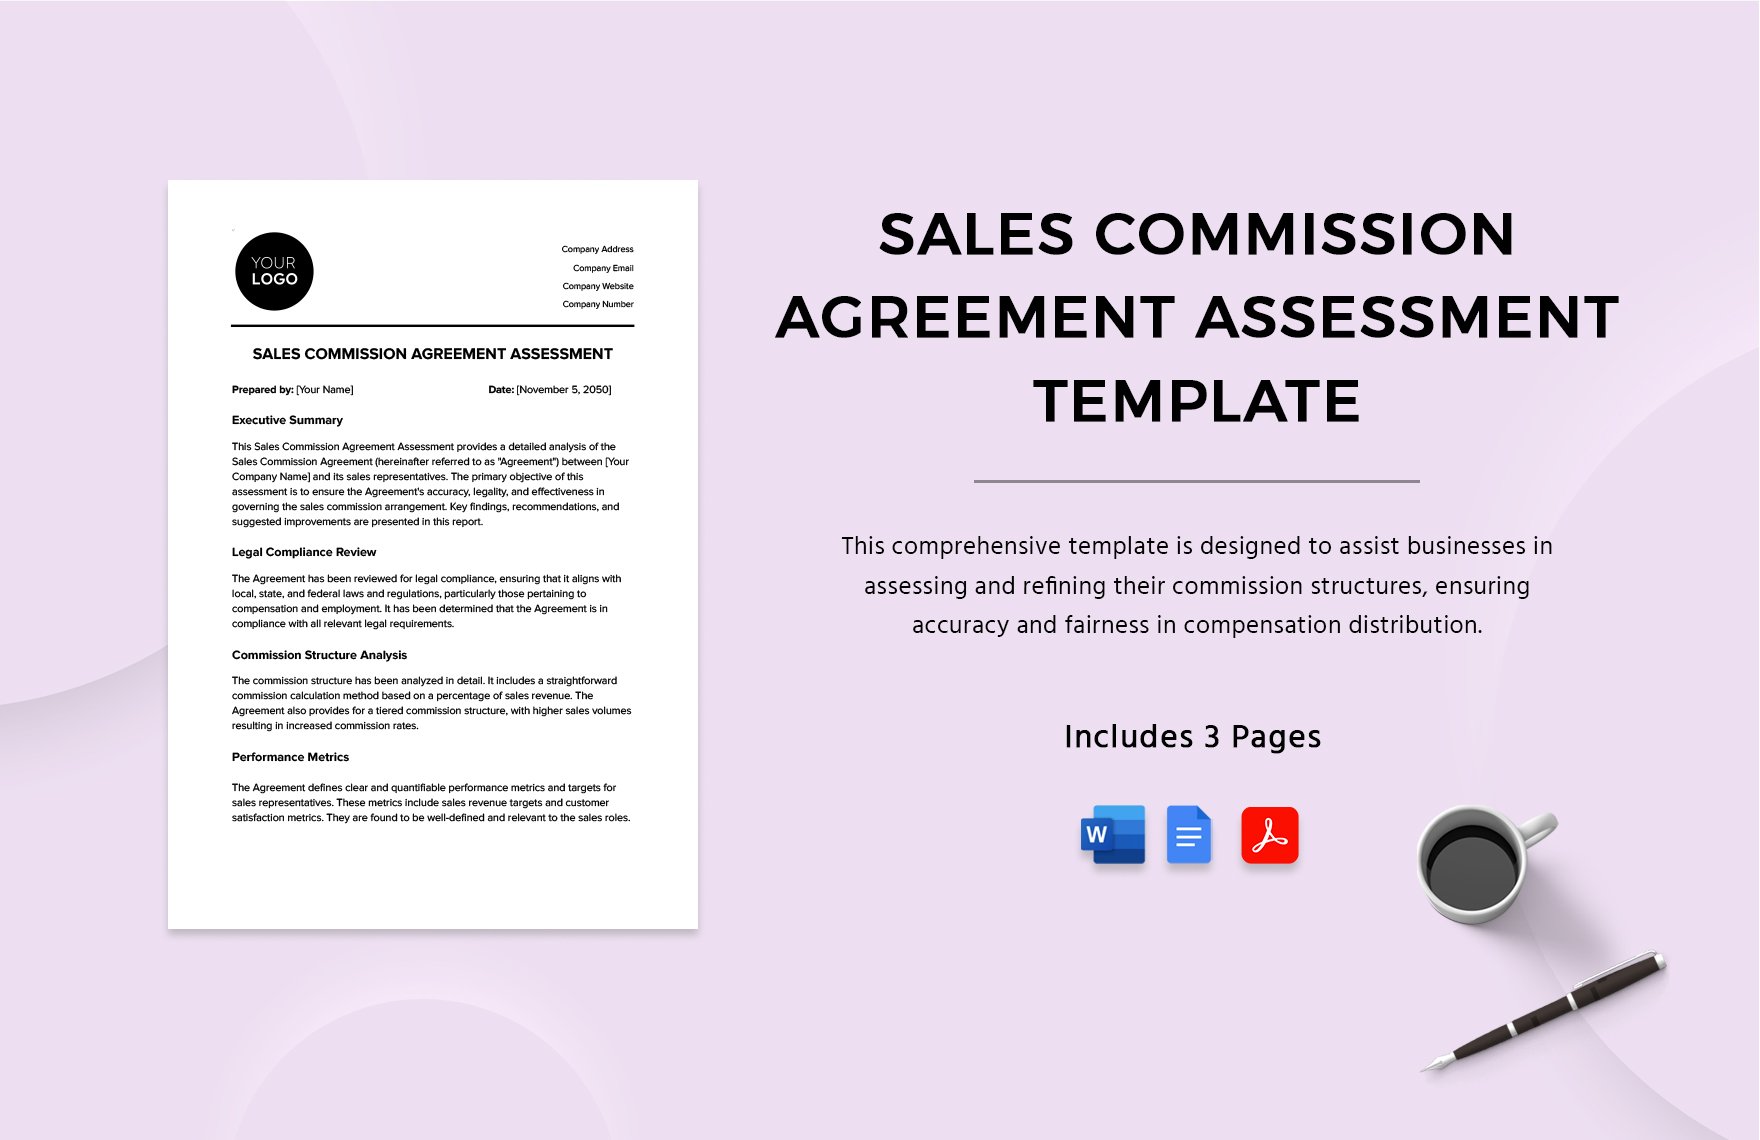 Sales Commission Agreement Assessment Template in Word, Google Docs, PDF